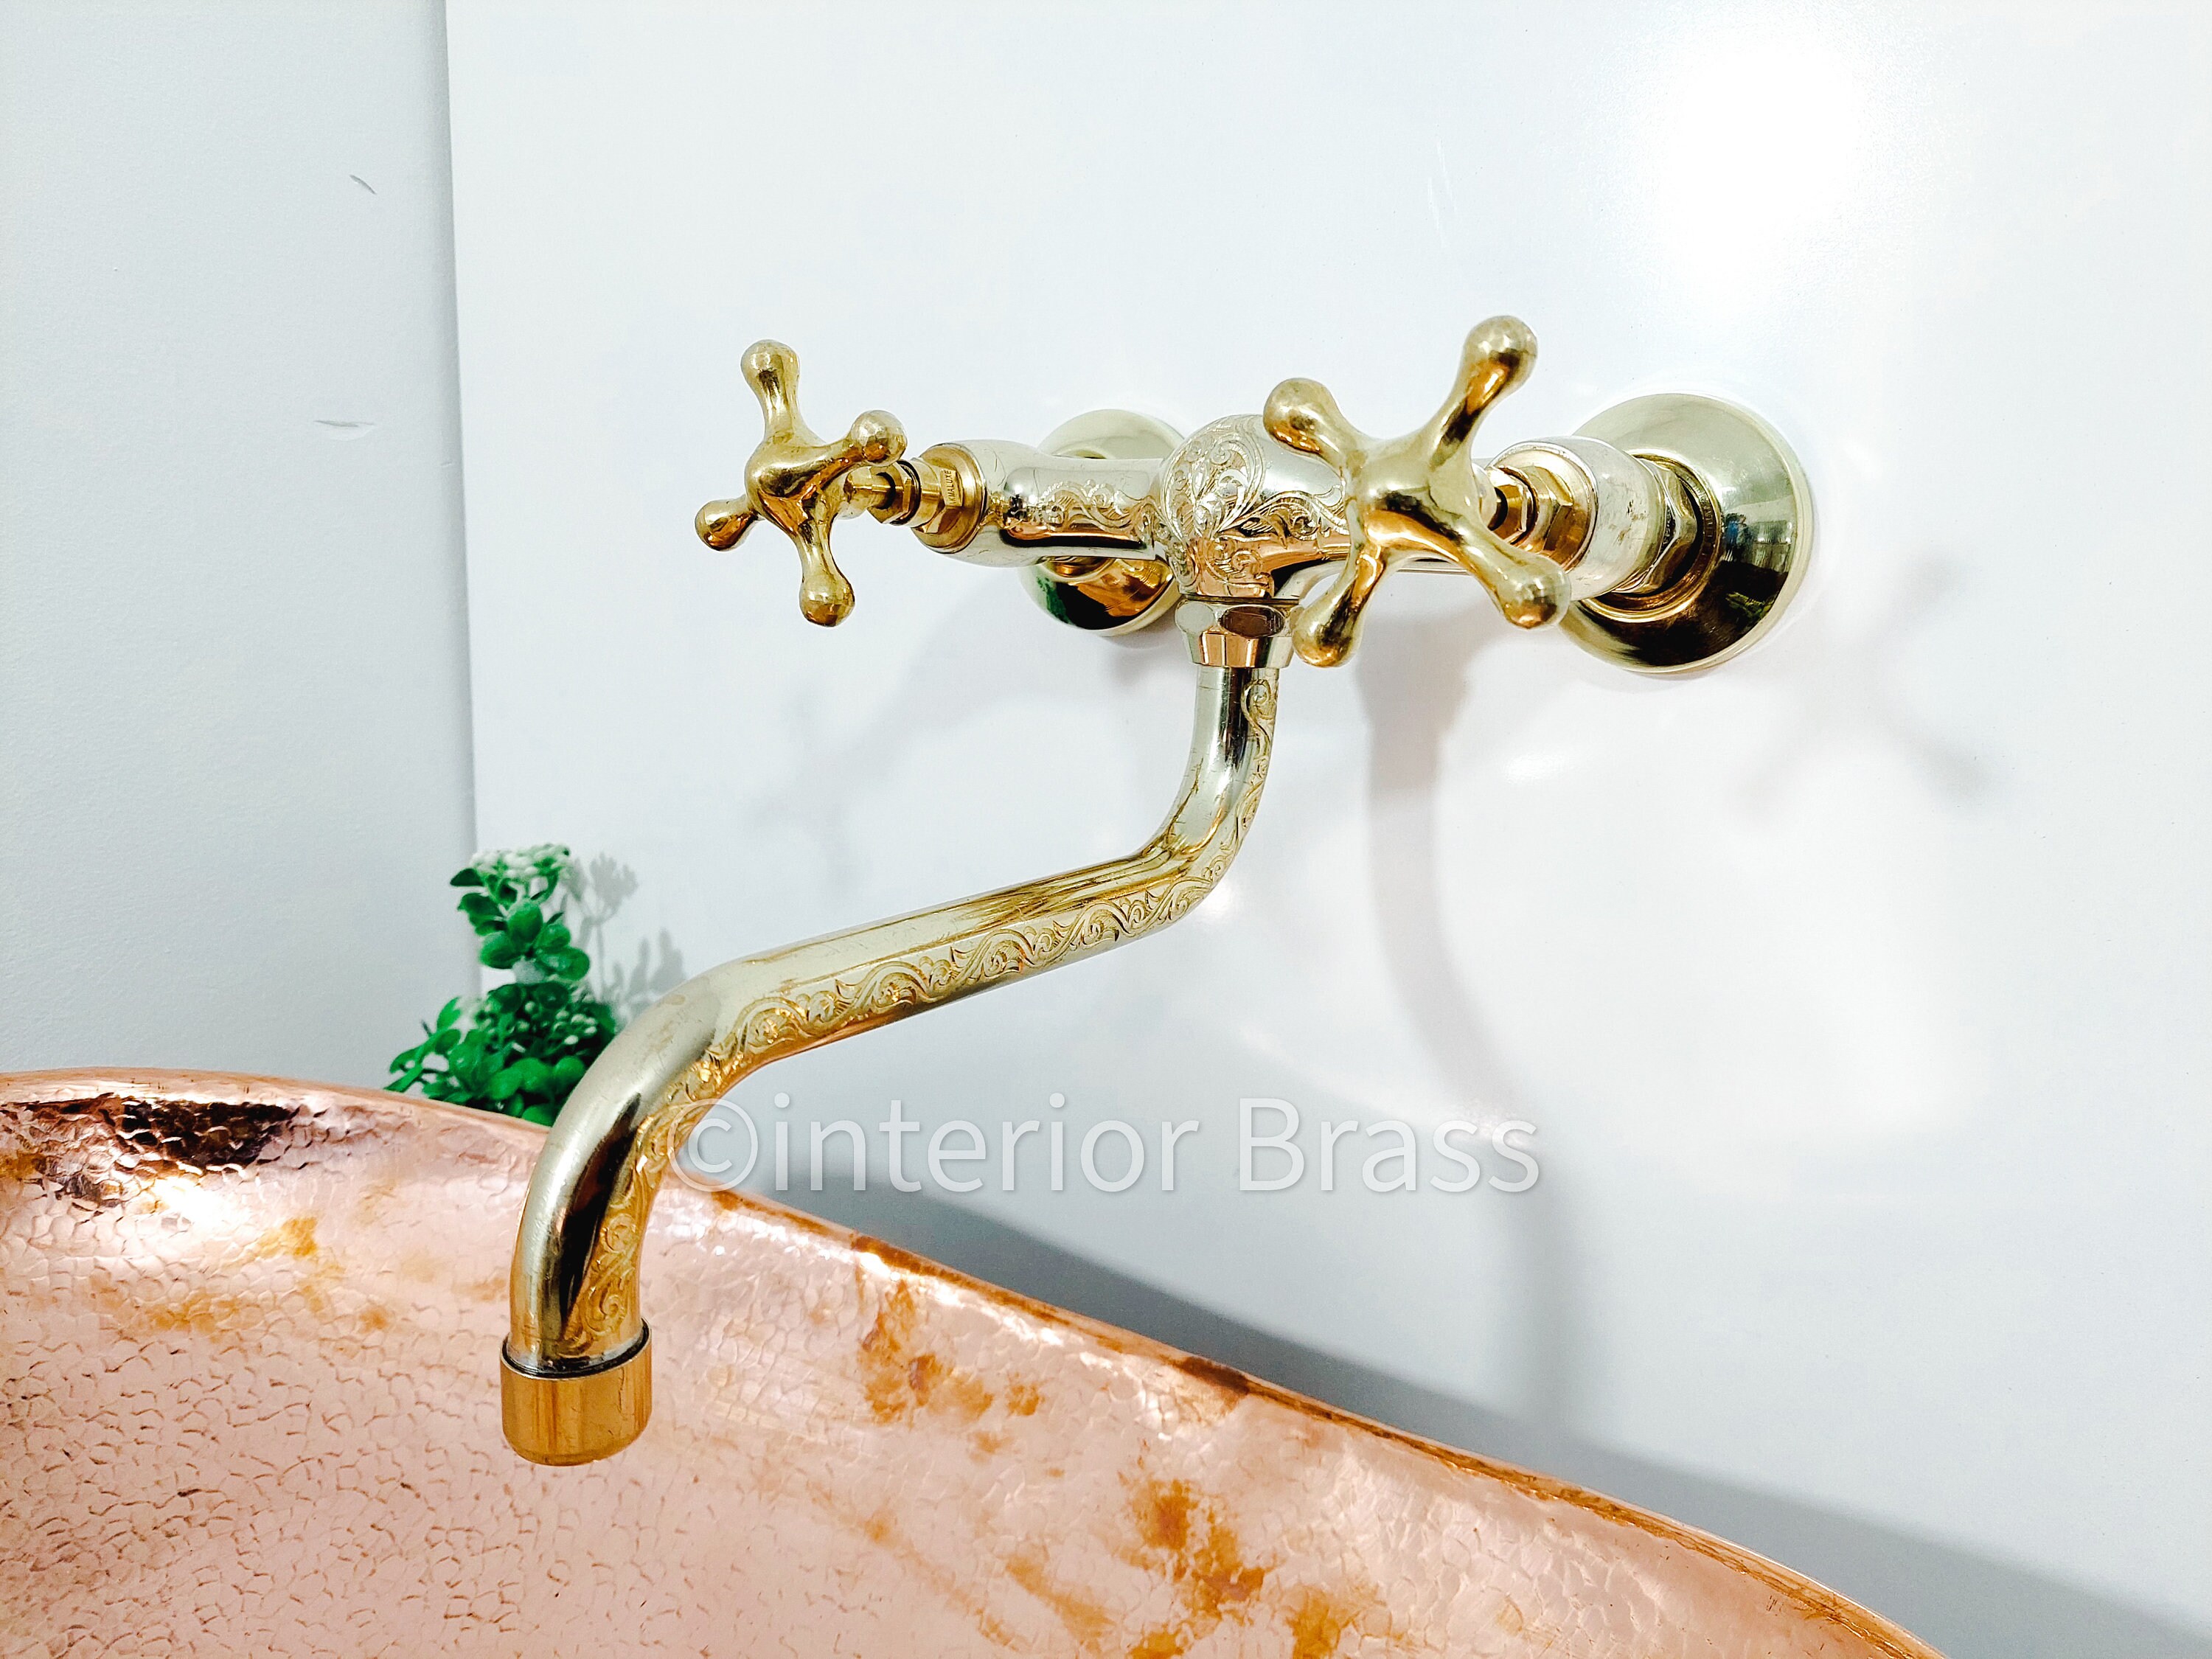 Pumpink All Bronze Black Antique Mixer Tap Hot And Cold Basin Bathroom European Style Brass Bathroom Cabinet Drawing Single Handle Faucet Size : Short 